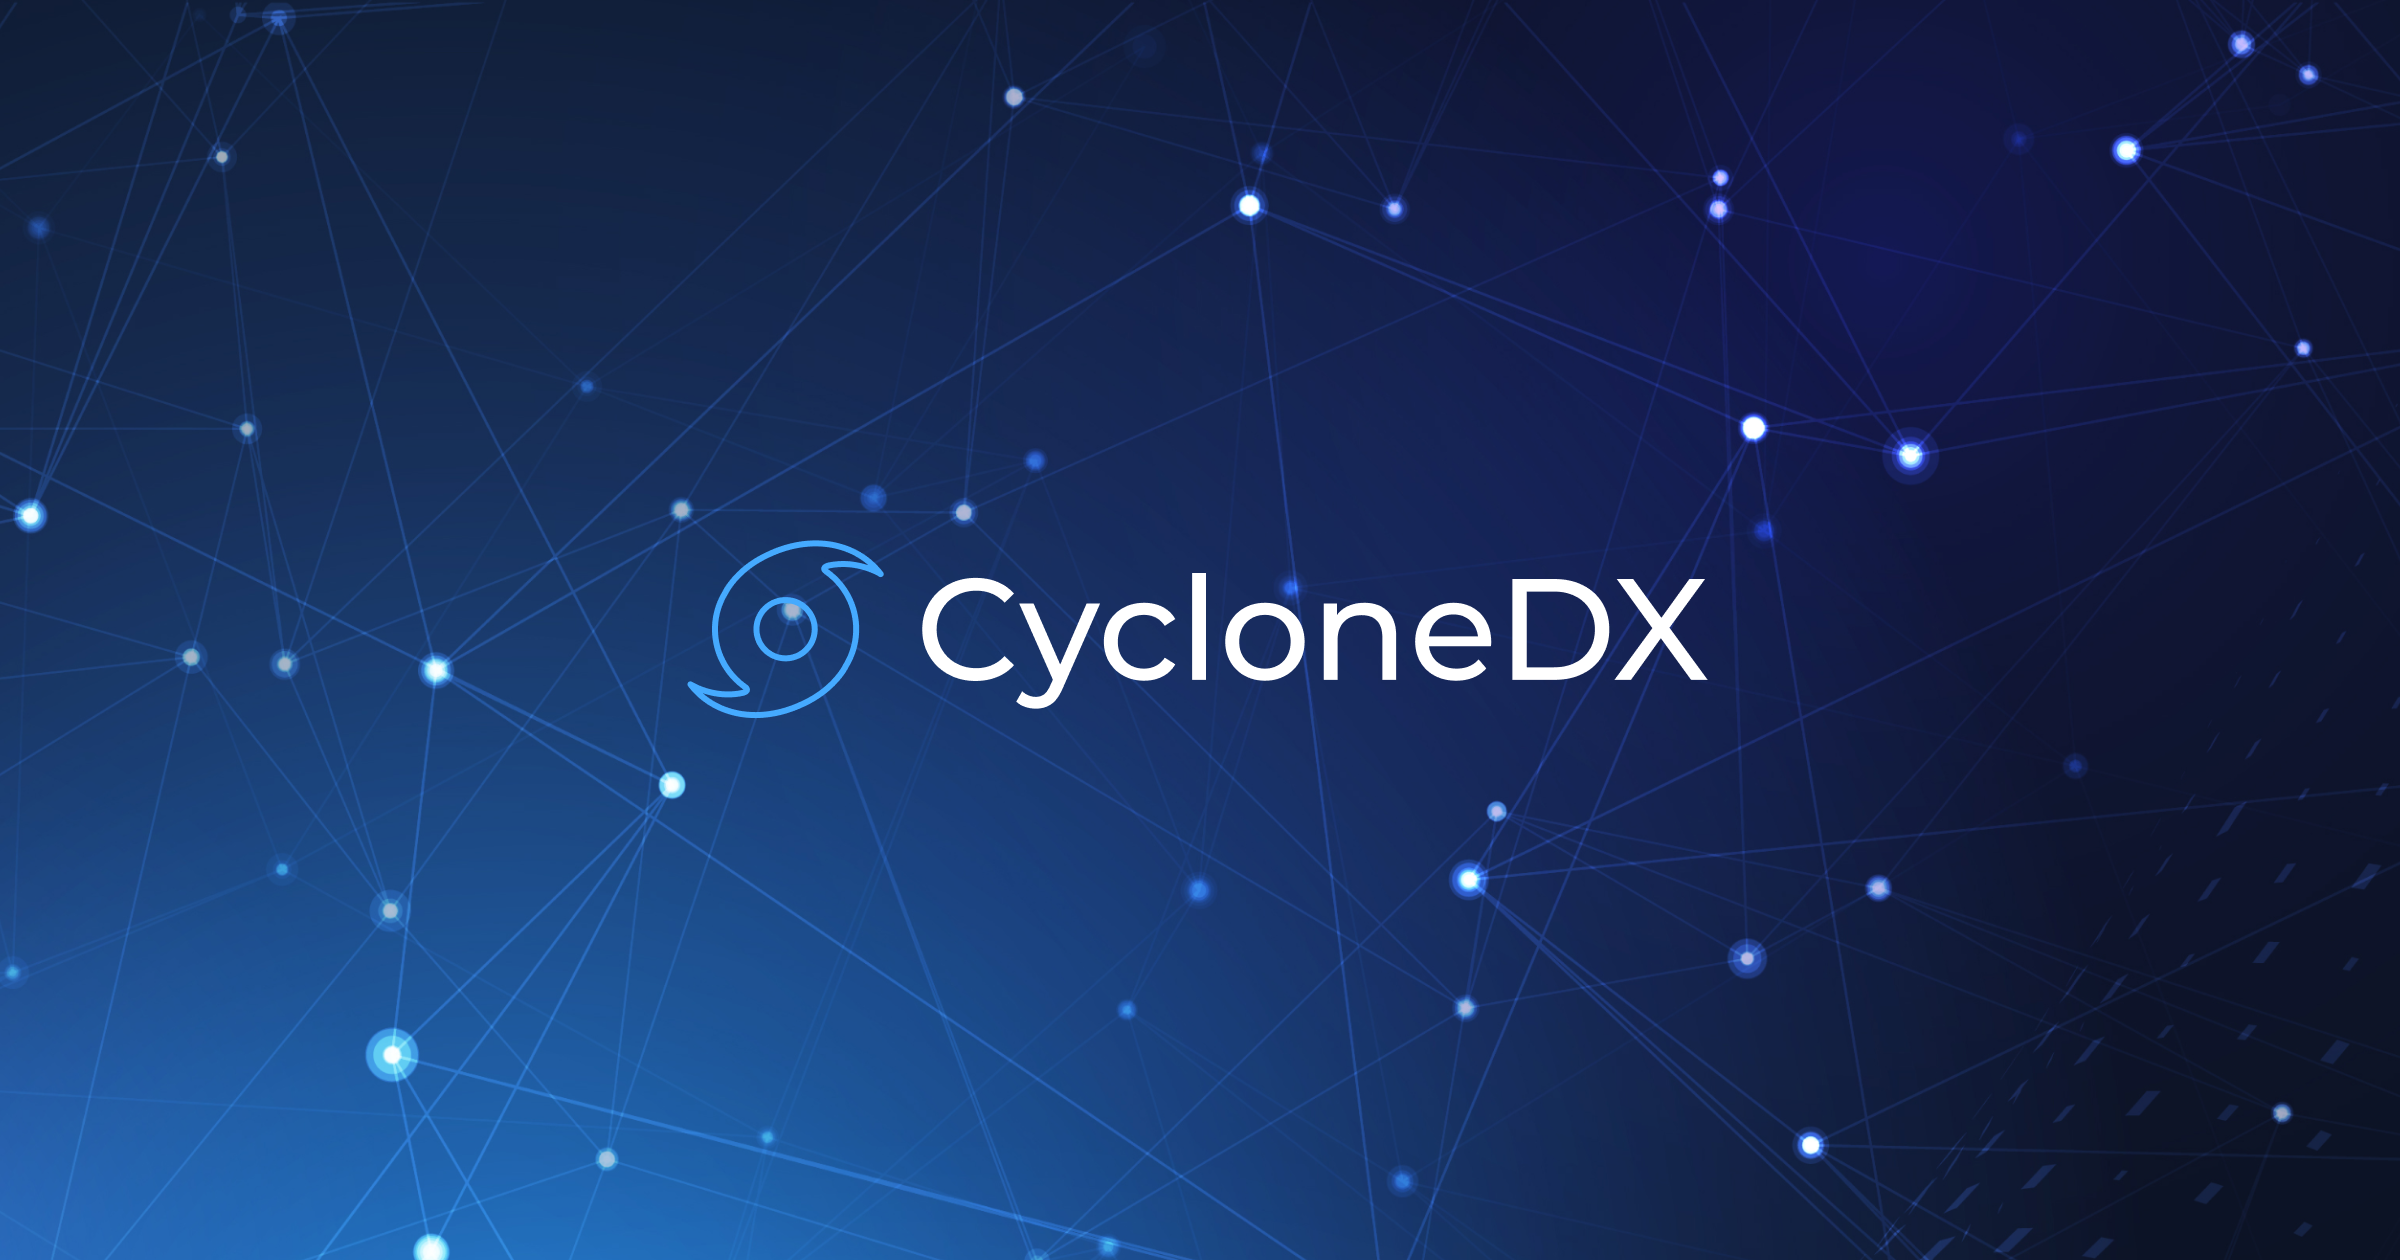 What’s New in CycloneDX 1.5?